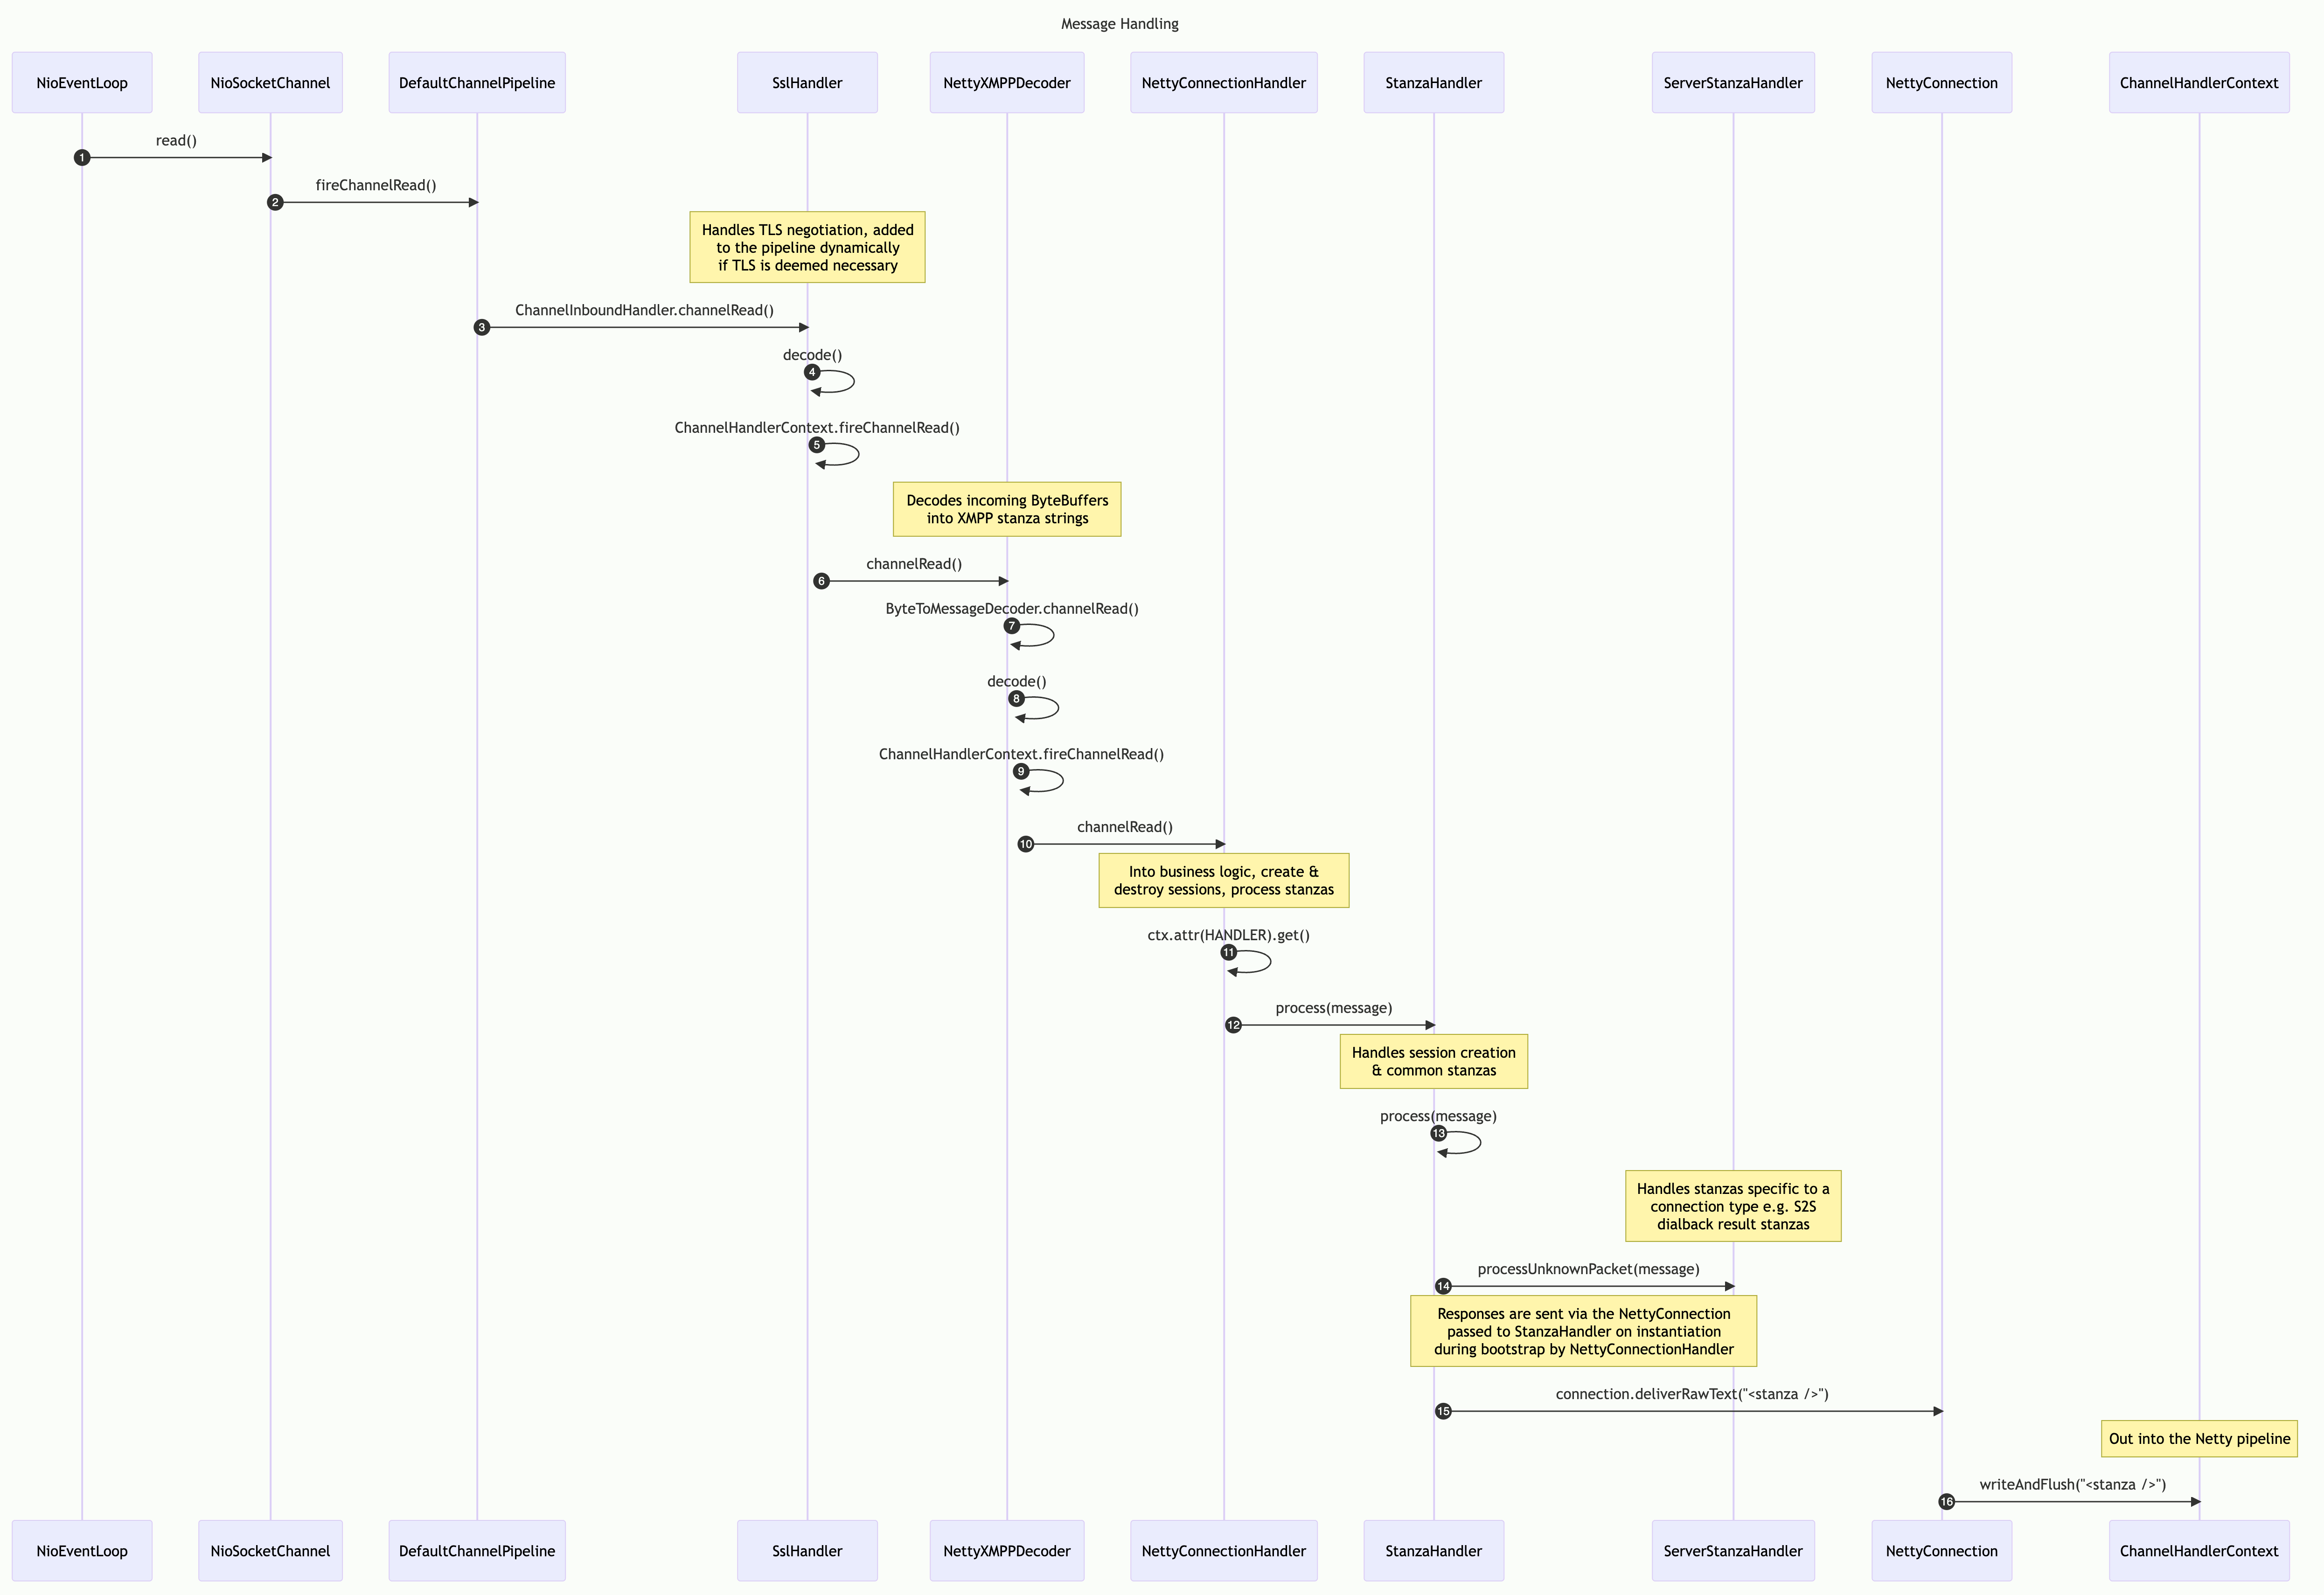 Diagram showing how Openfire handles messages with Netty